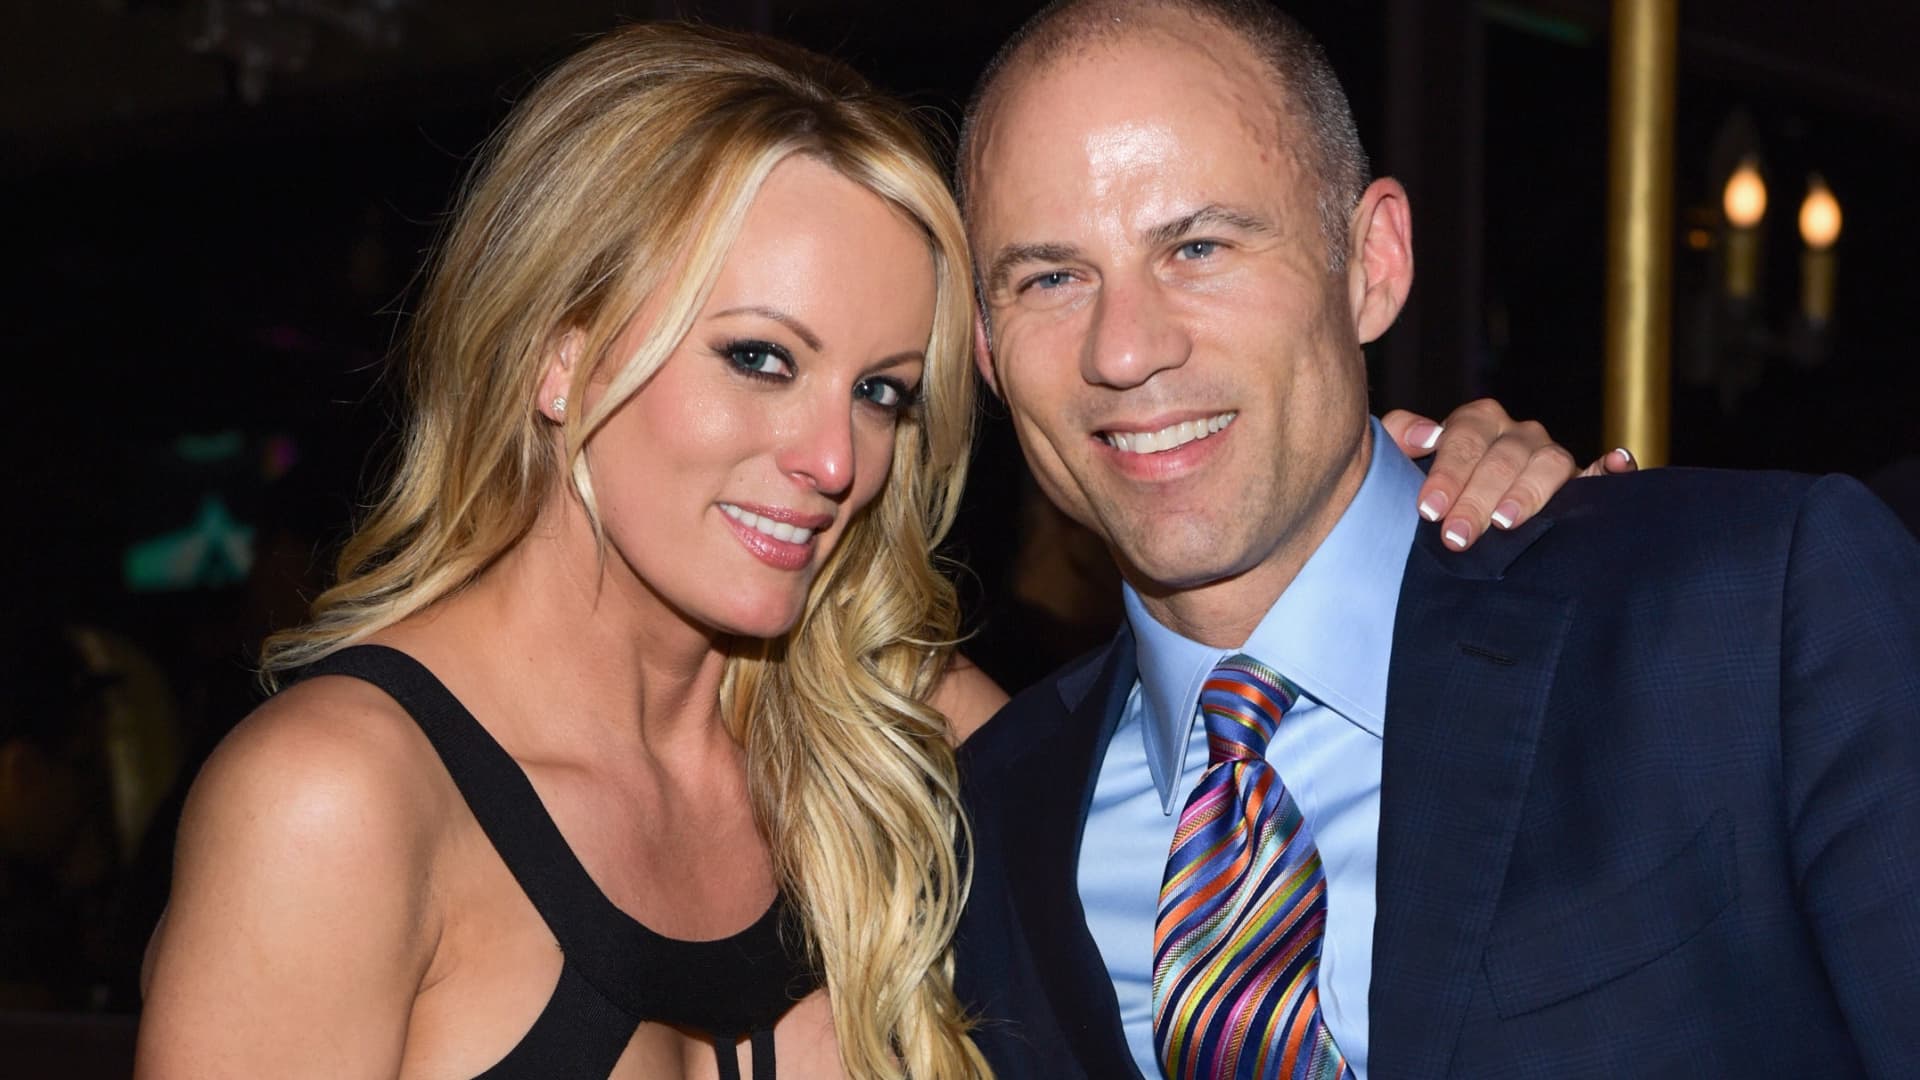 Michael Avenatti sentenced to 4 years in prison for stealing from Stormy Daniels